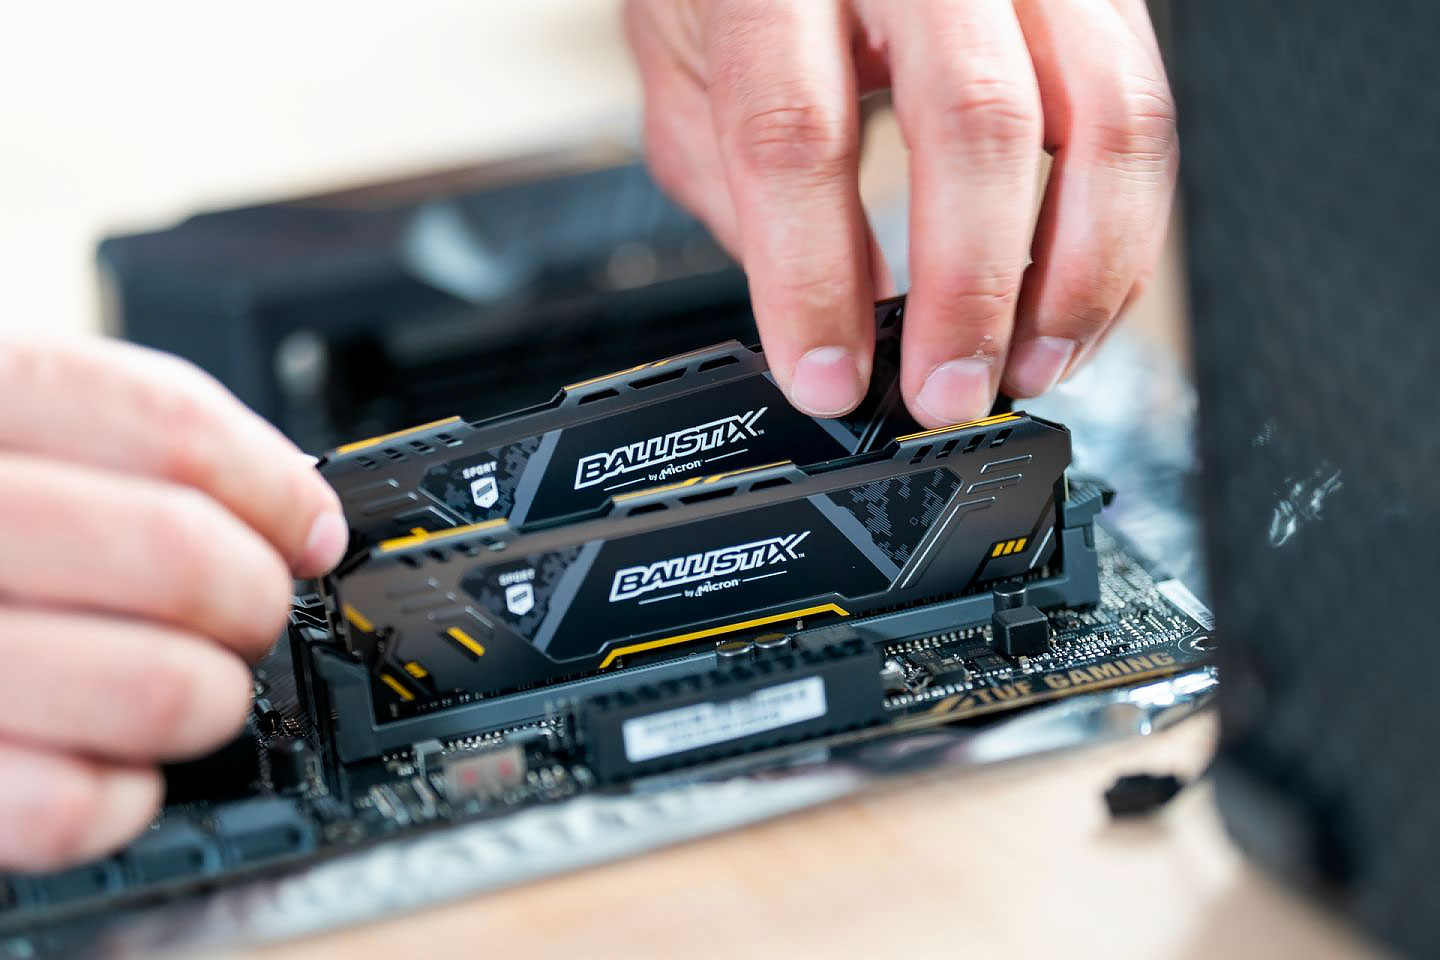 Ballistix memory being placed on motherboard